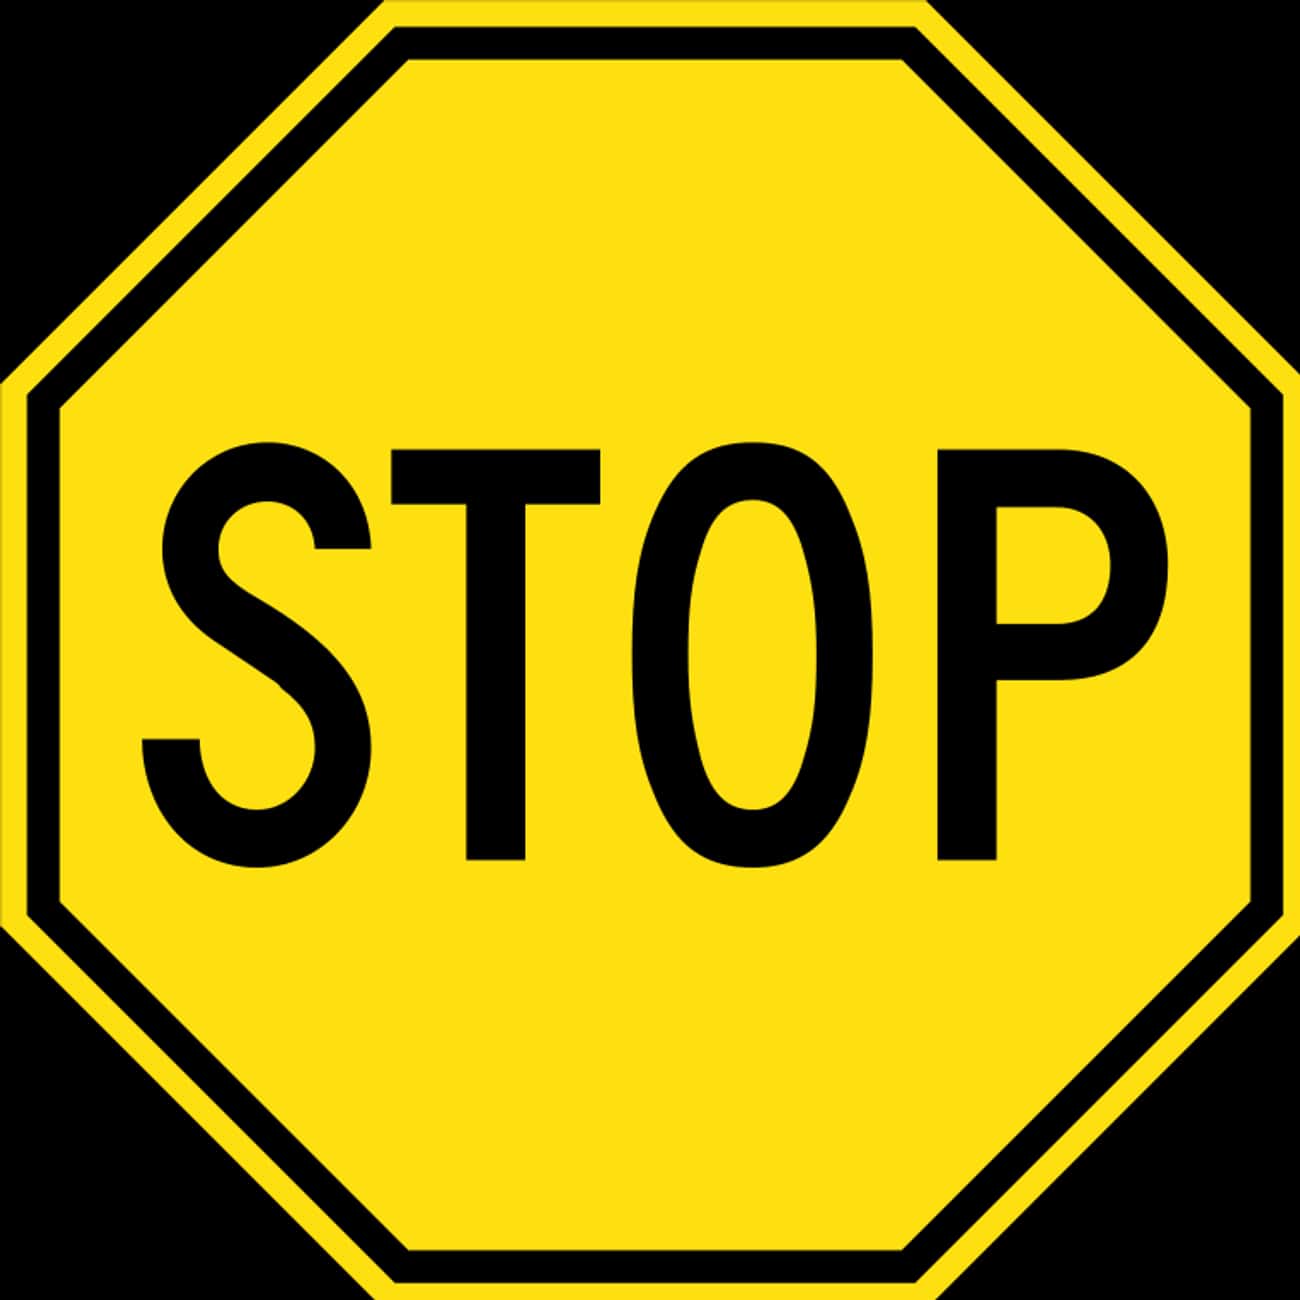 The First Stop Signs Were Used in Michigan